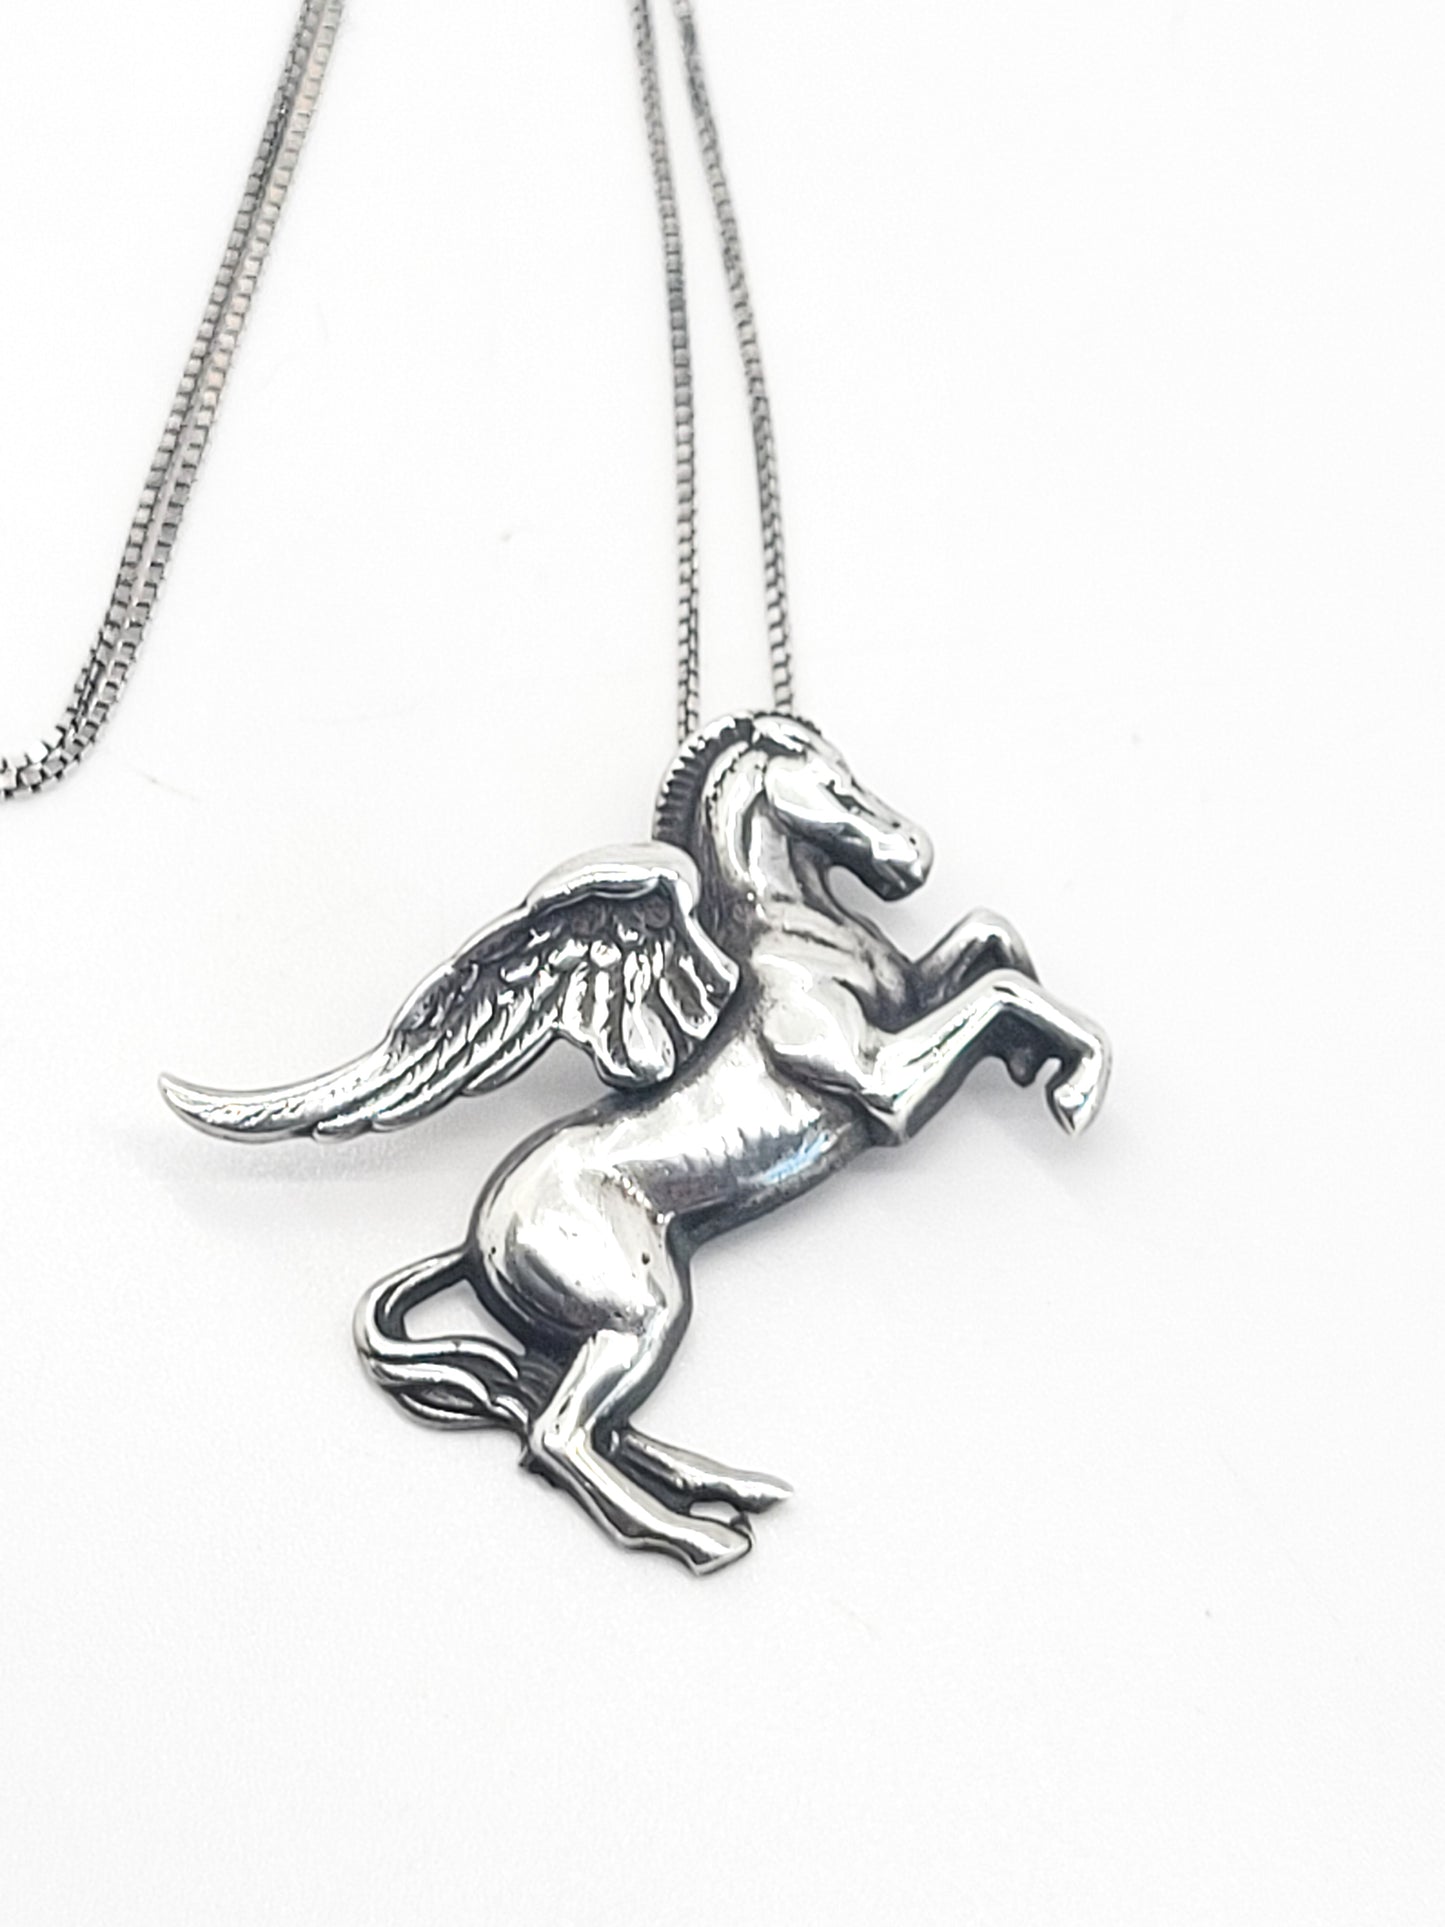 Pegasus flying winged horse mythical fantasy sterling silver pendant necklace